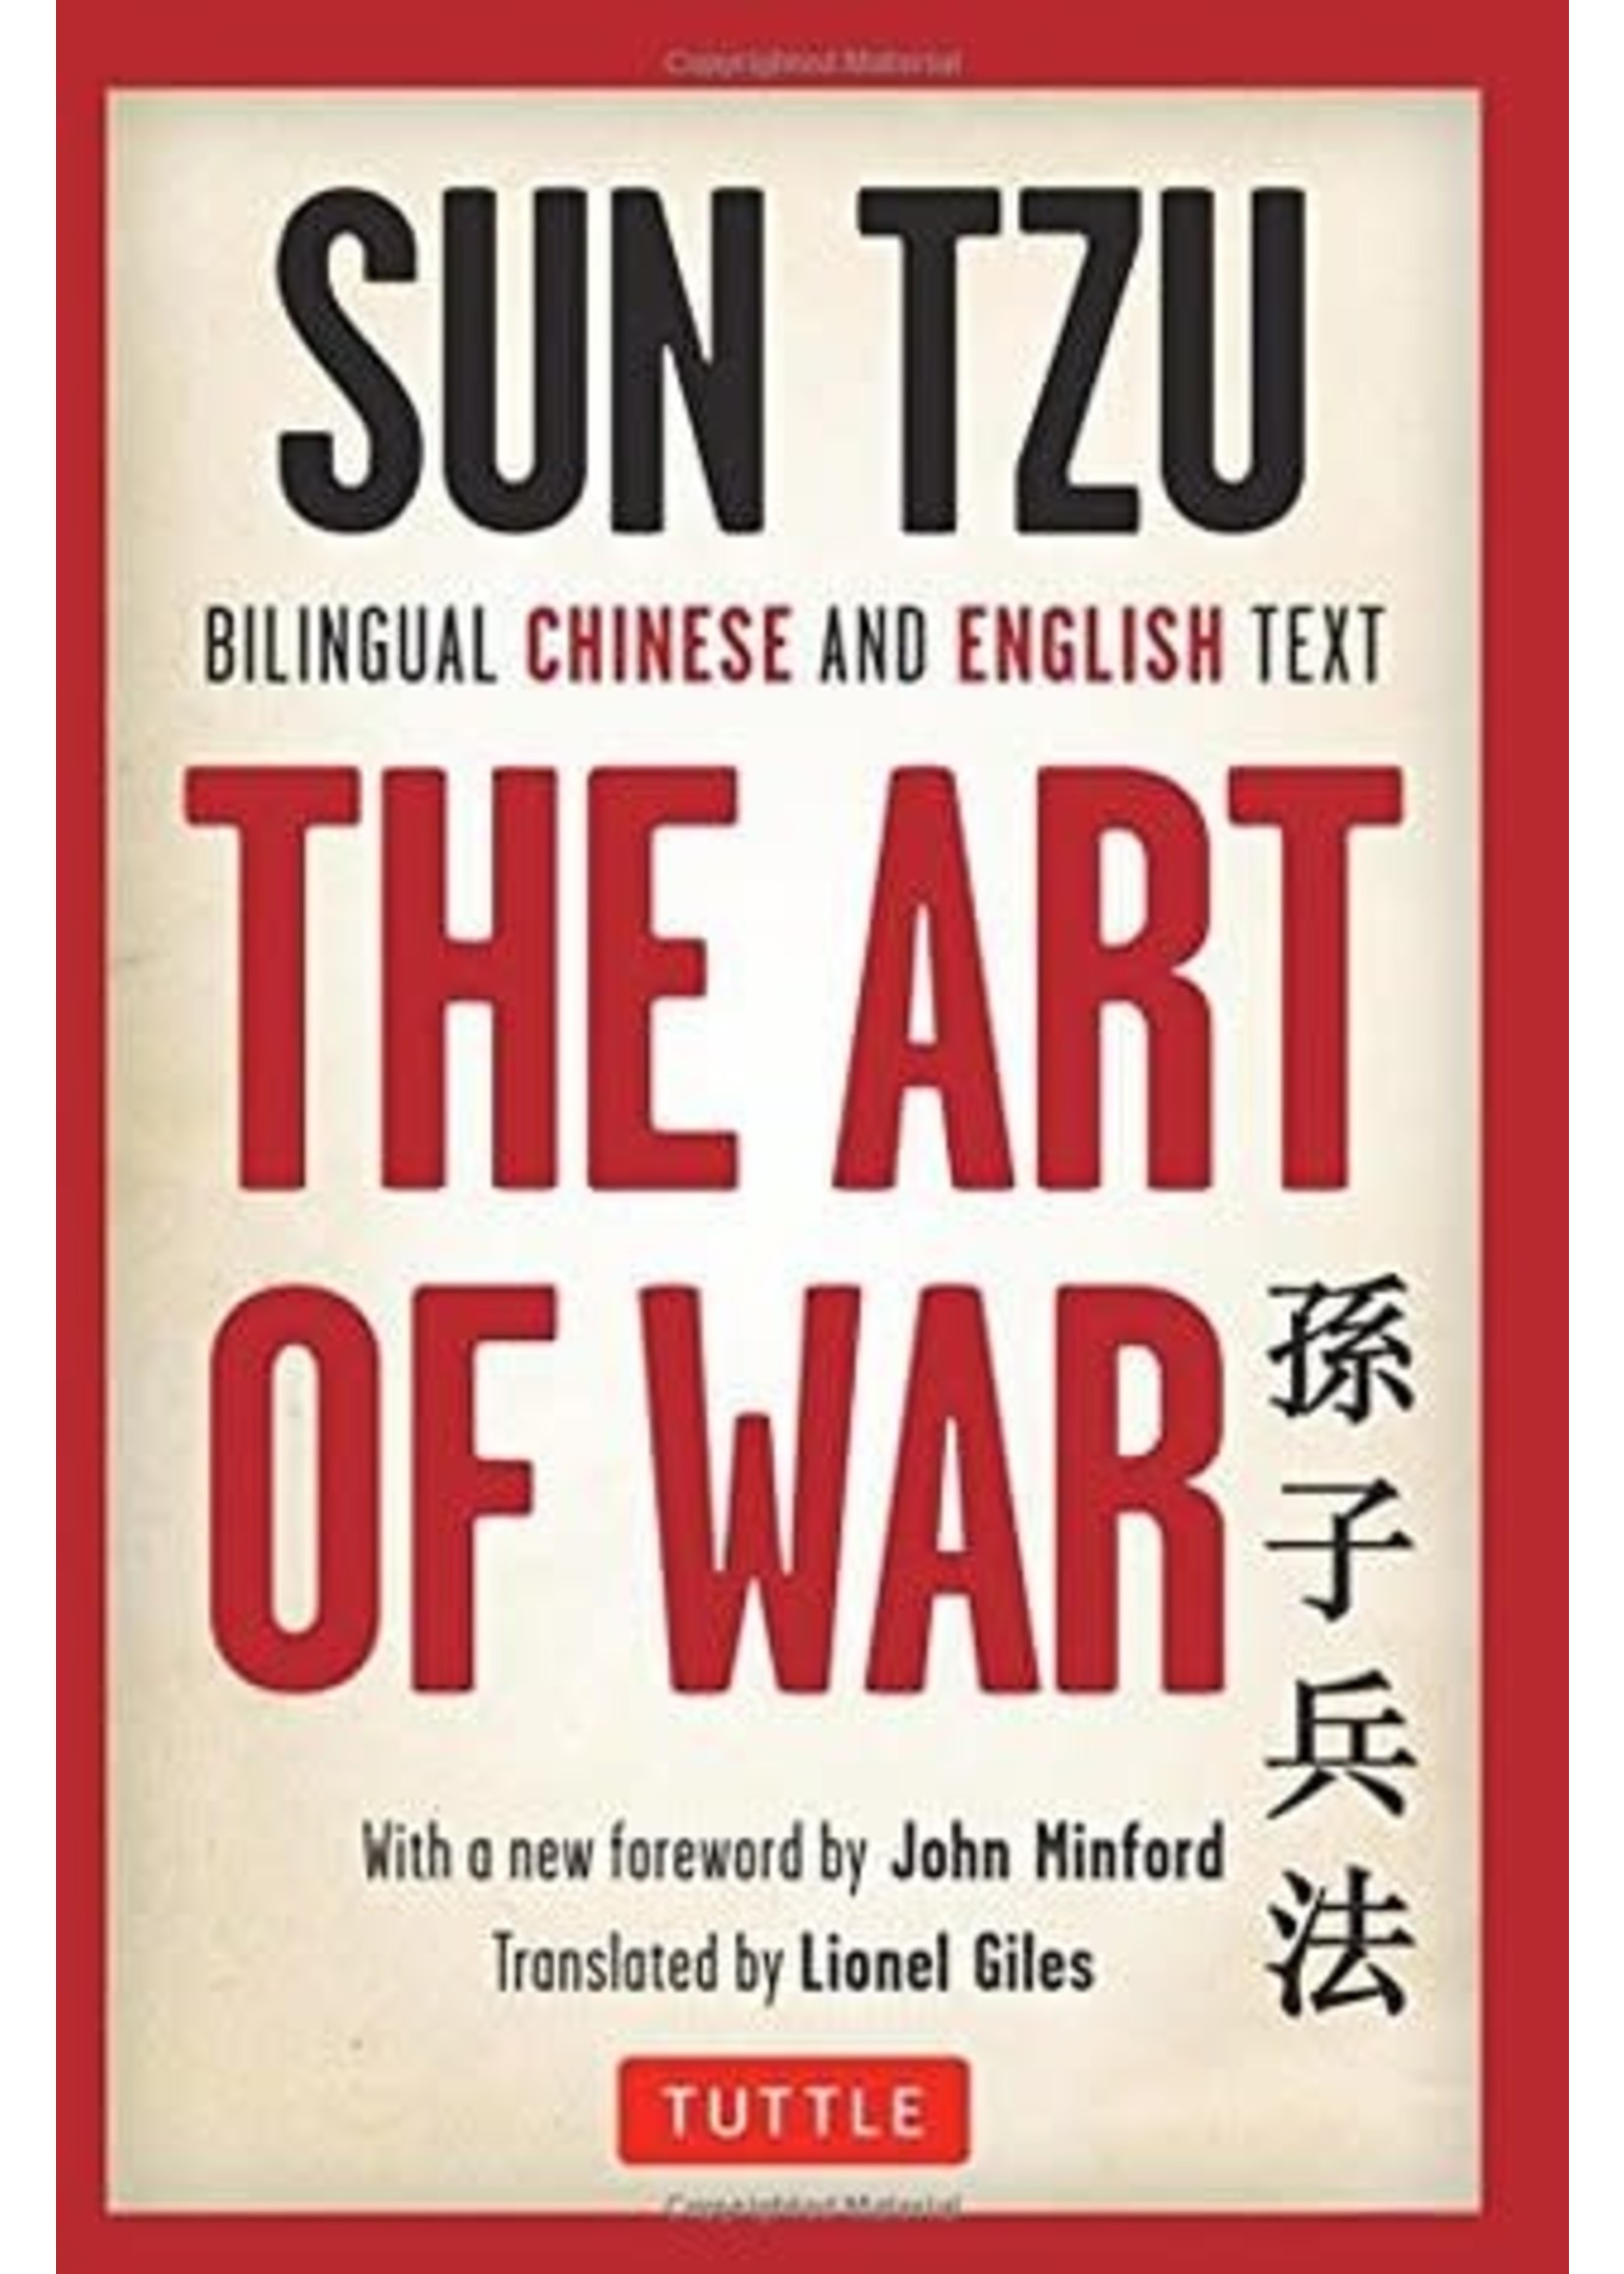 The Art of War: Bilingual Chinese and English Text by Sun Tzu